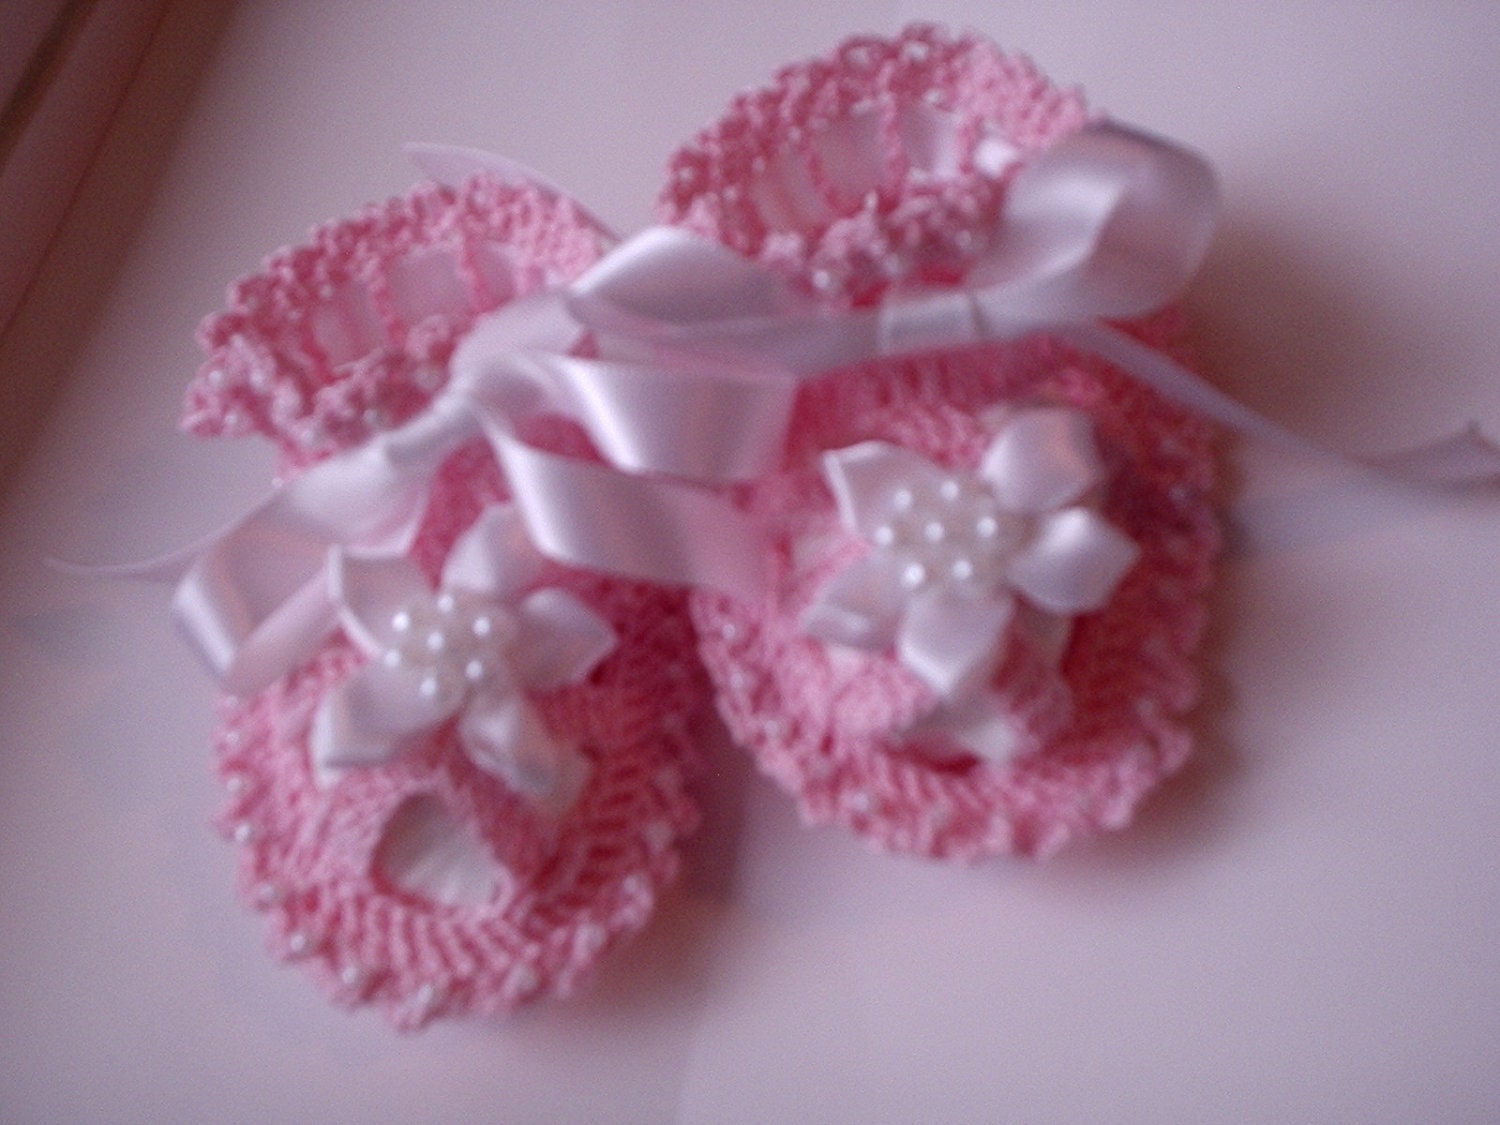 Custom, Crocheted Beaded Baby Booties Sandals for Baby Girl or Baby ...